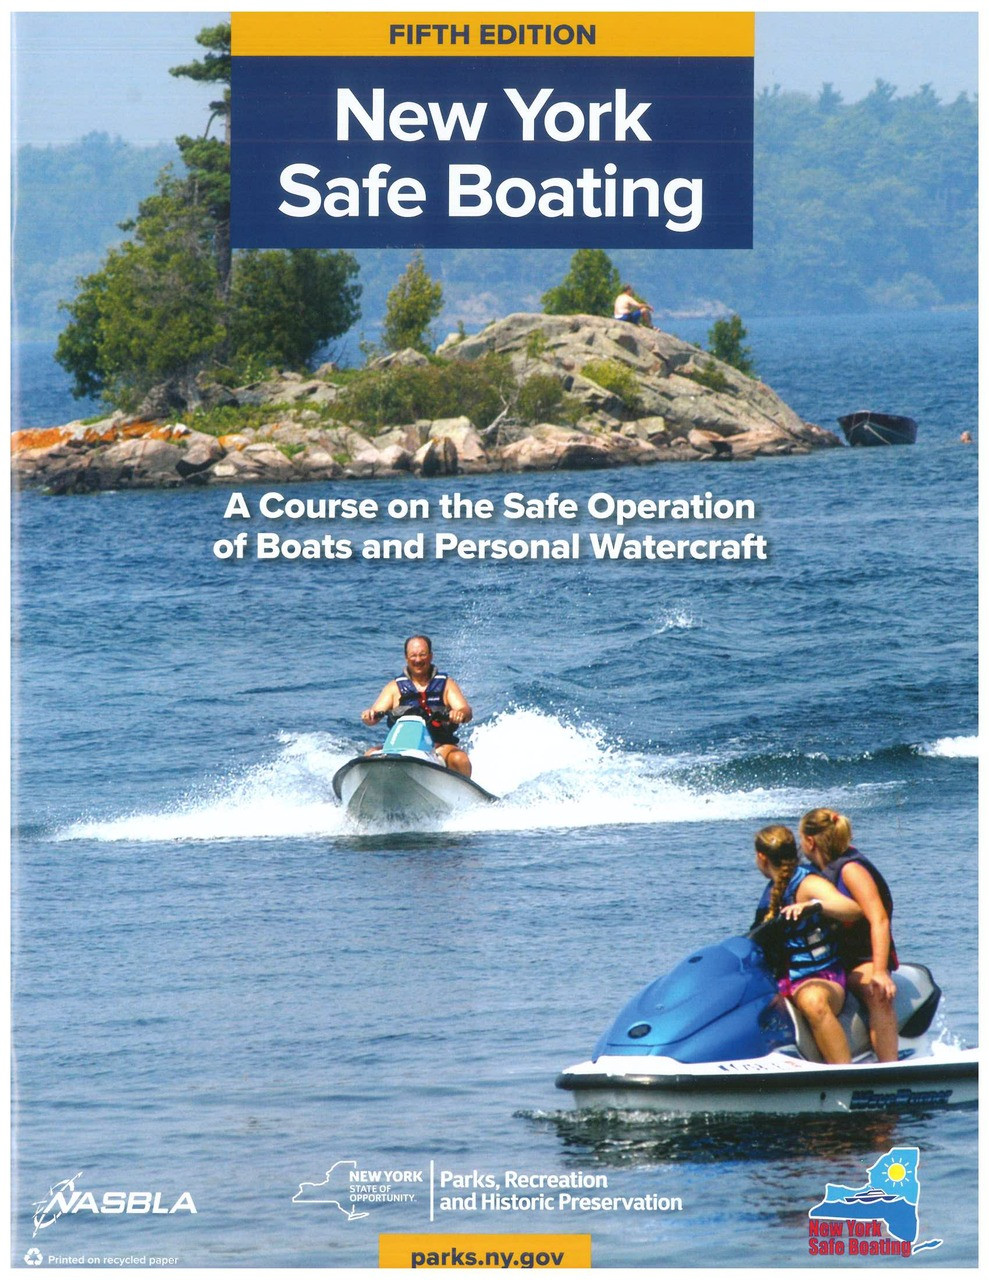 NYS Safe Boating Class, July 17, 2022 8:30AM-4:30PM, Bethpage